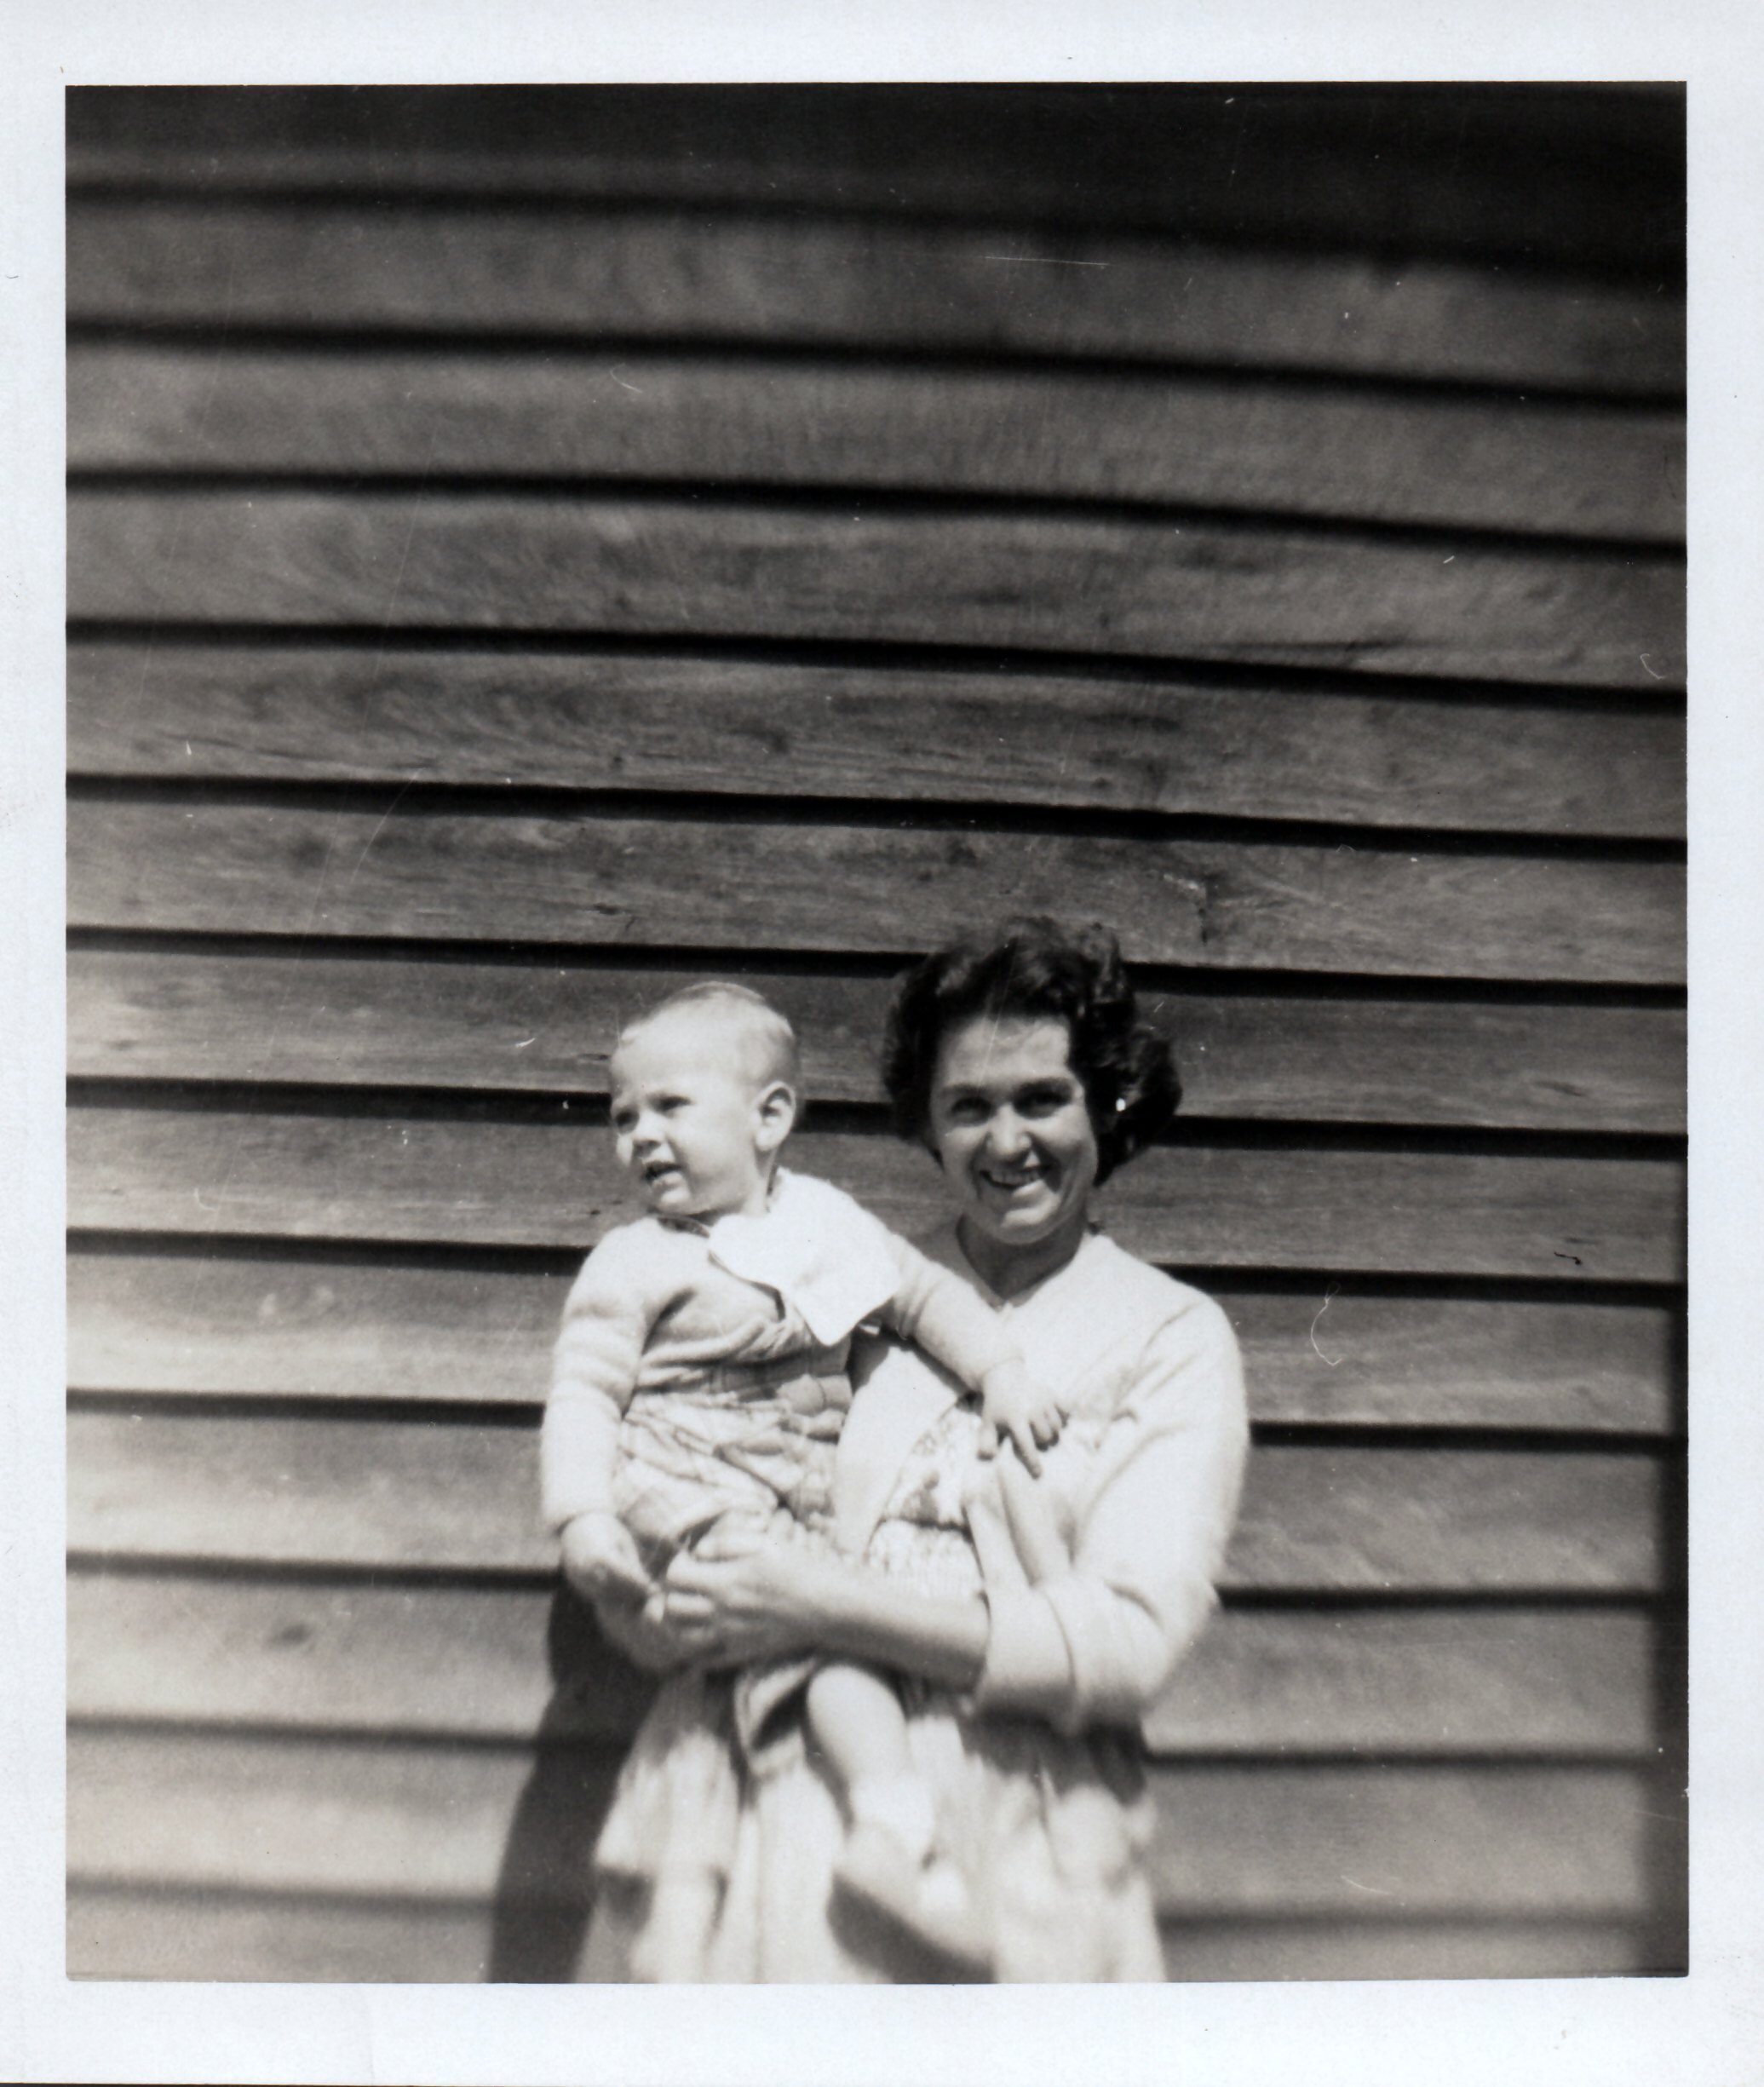 Our mother, Noeline, the youngest of five children, abandoned by her mother, holding my first little brother Steven.